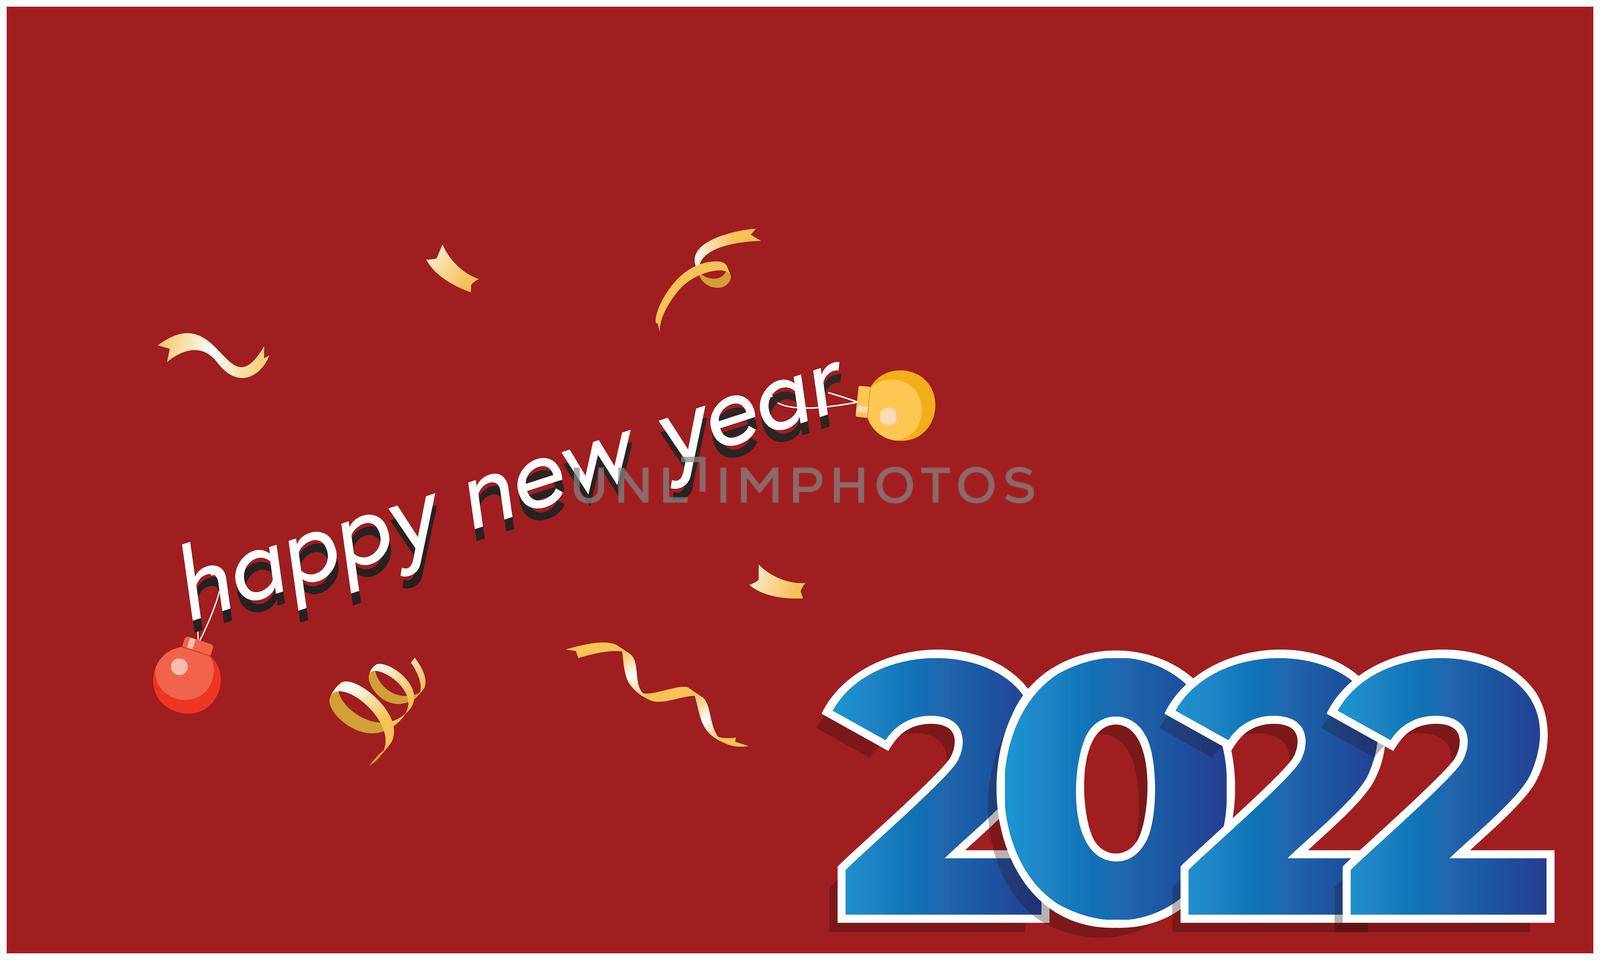 art of Happy new year 2022 on abstract red background